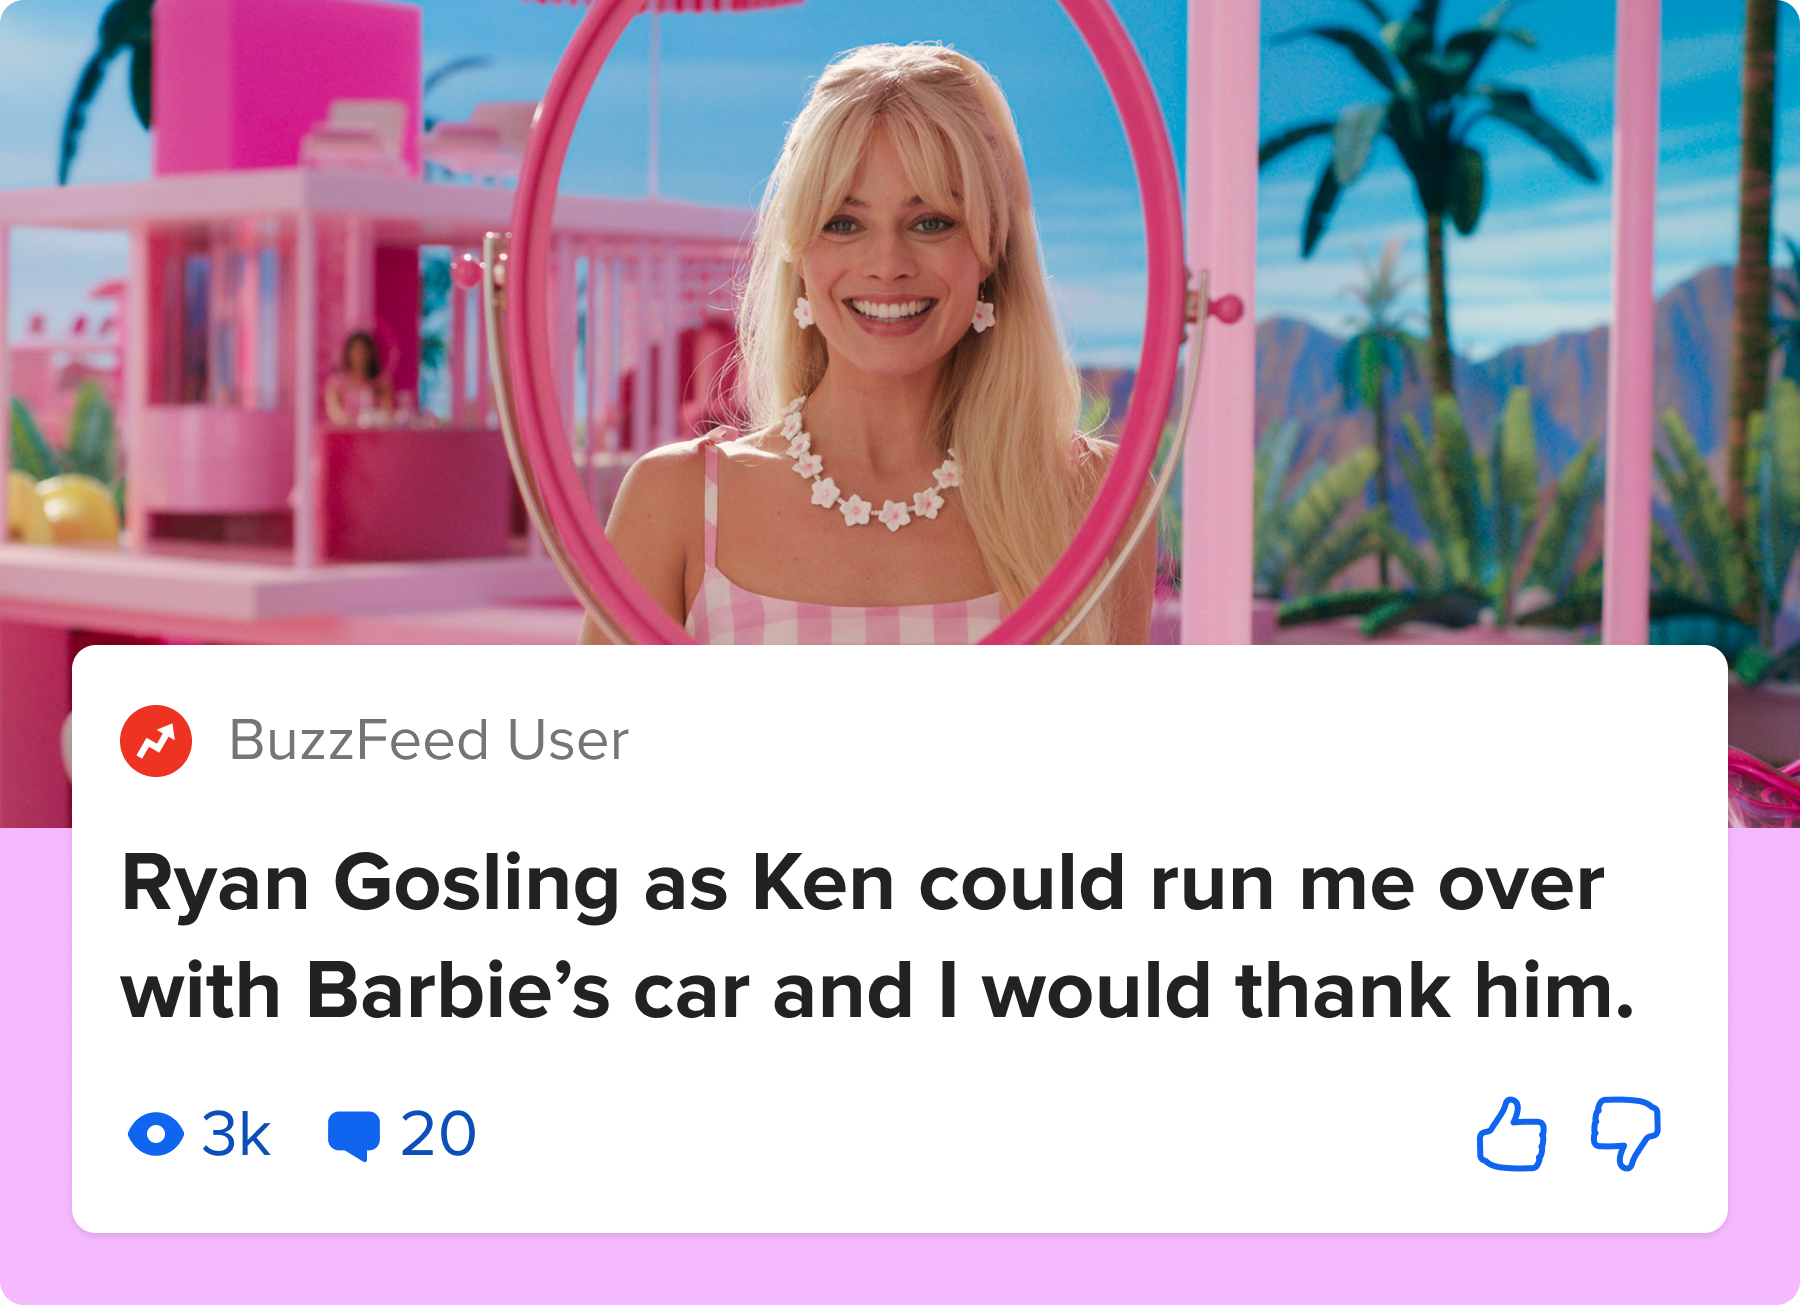 &quot;Ryan Gosling as Ken could run me over with Barbie&#x27;s car and I would thank him.&quot;